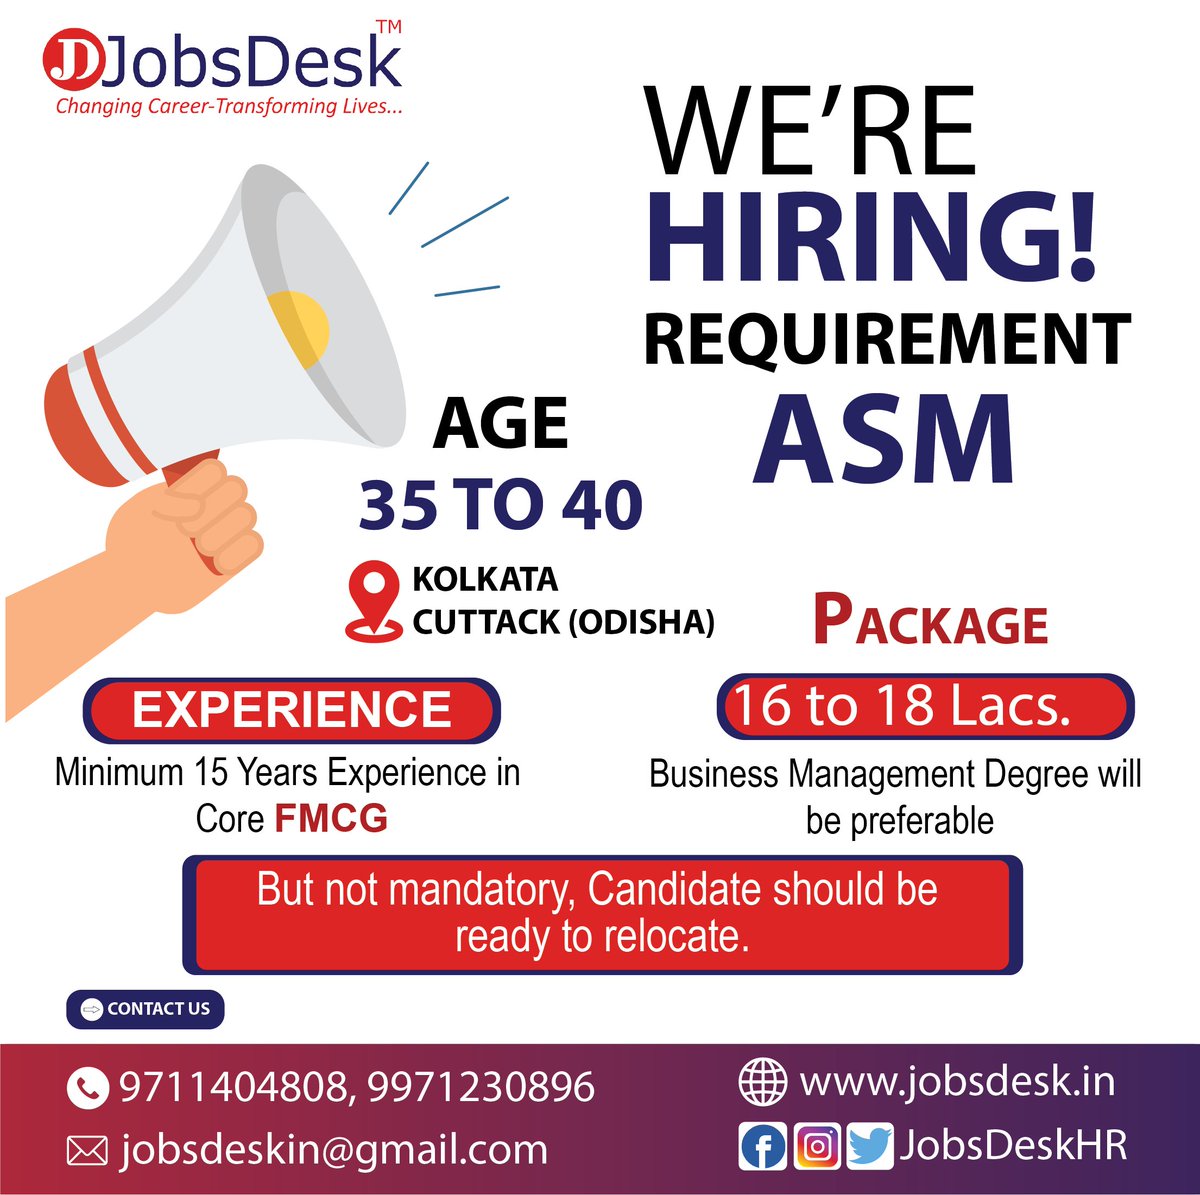 Get your dream job today with desired salary
So please contact Us: 9711404808
Visit Our Website: jobsdesk.in
#jobless #jobs #hiring #corporatejob #jobsearch #career #growth #vacancy #jobvacancy #hrconsulting #hrconsultancy #placement #business #hr #hrtalk #recruitment